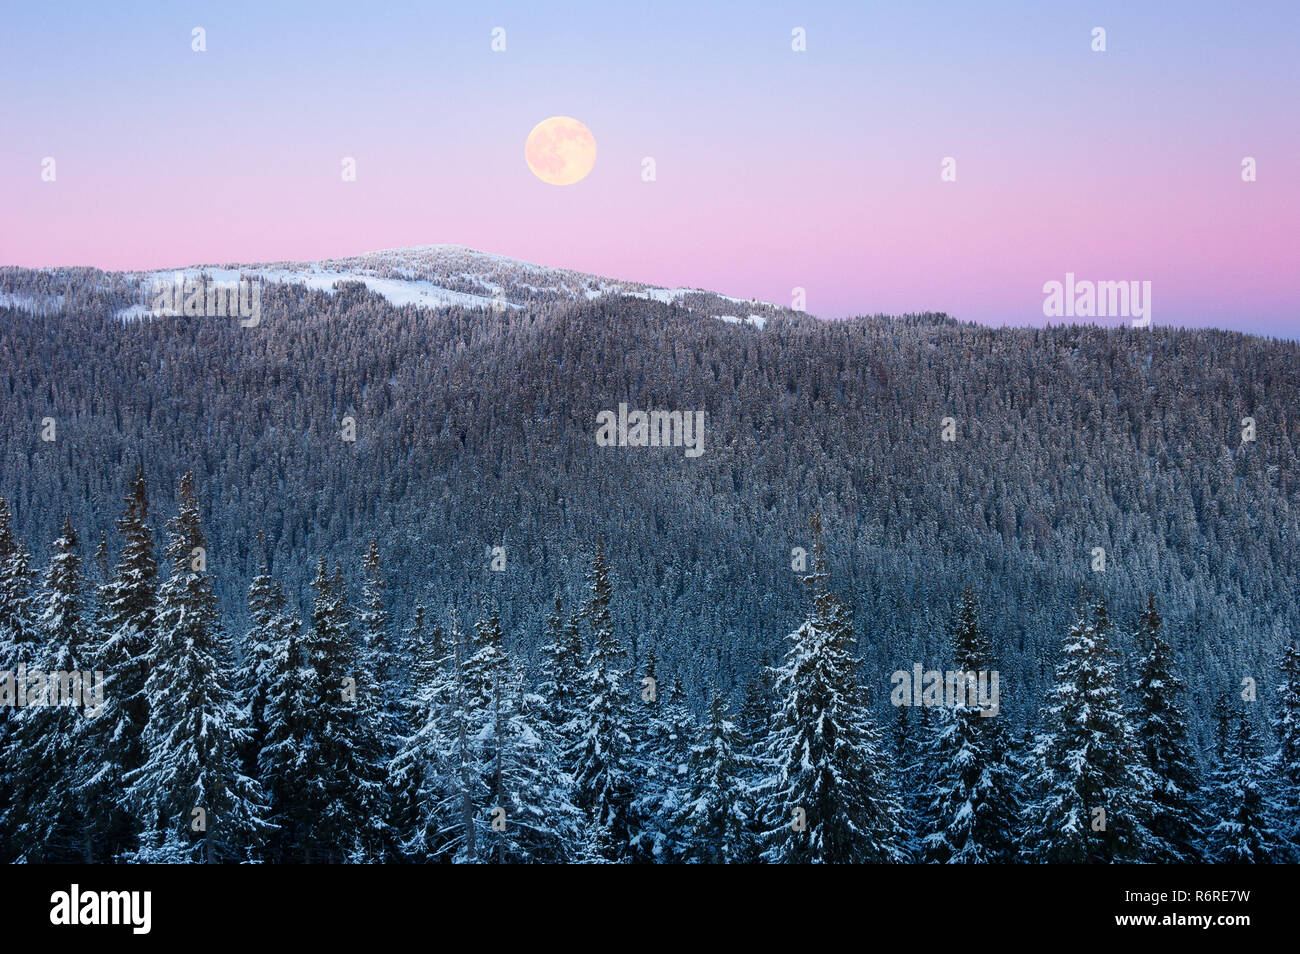 Winter landscape with a full moon over the hill. Mountain spruce forest in hoarfrost. Pink twilight after sunset Stock Photo